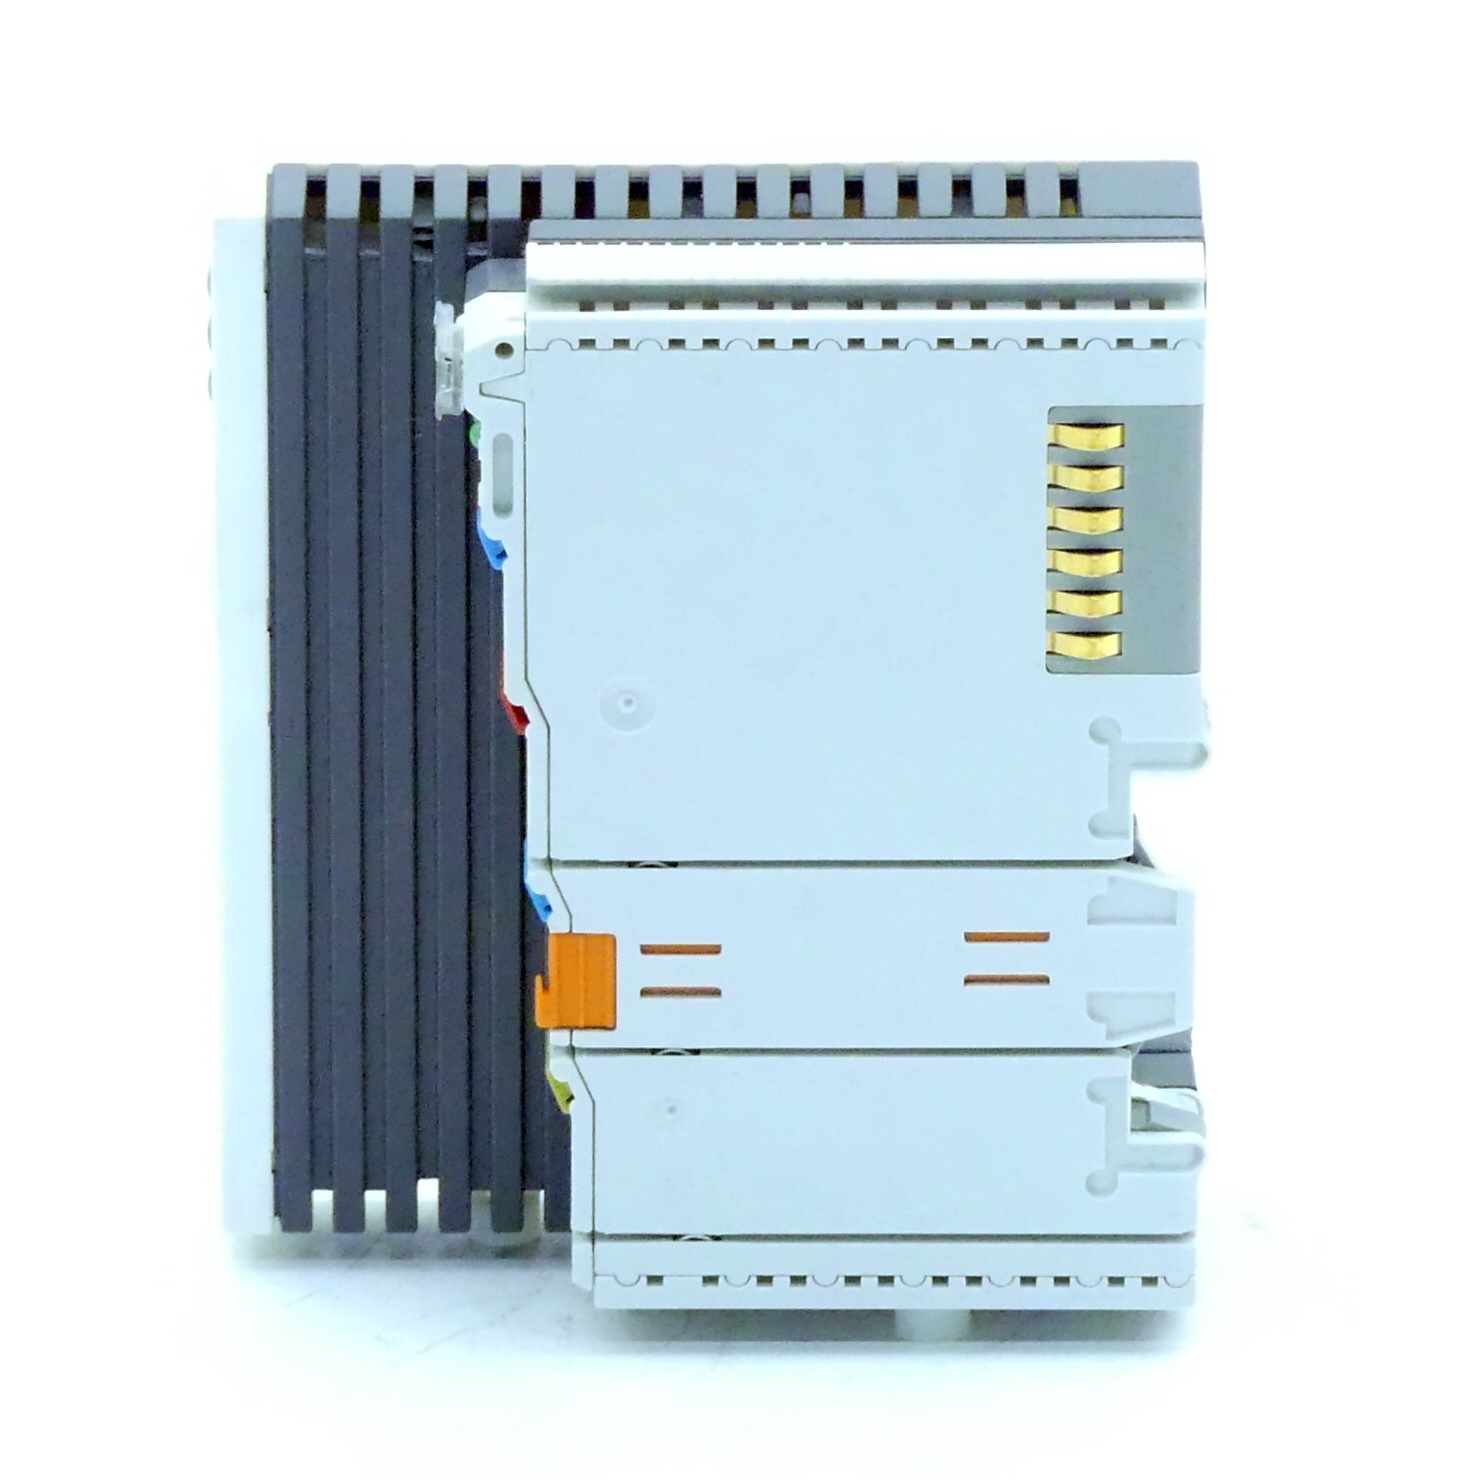 Power supply units and I/O interface 